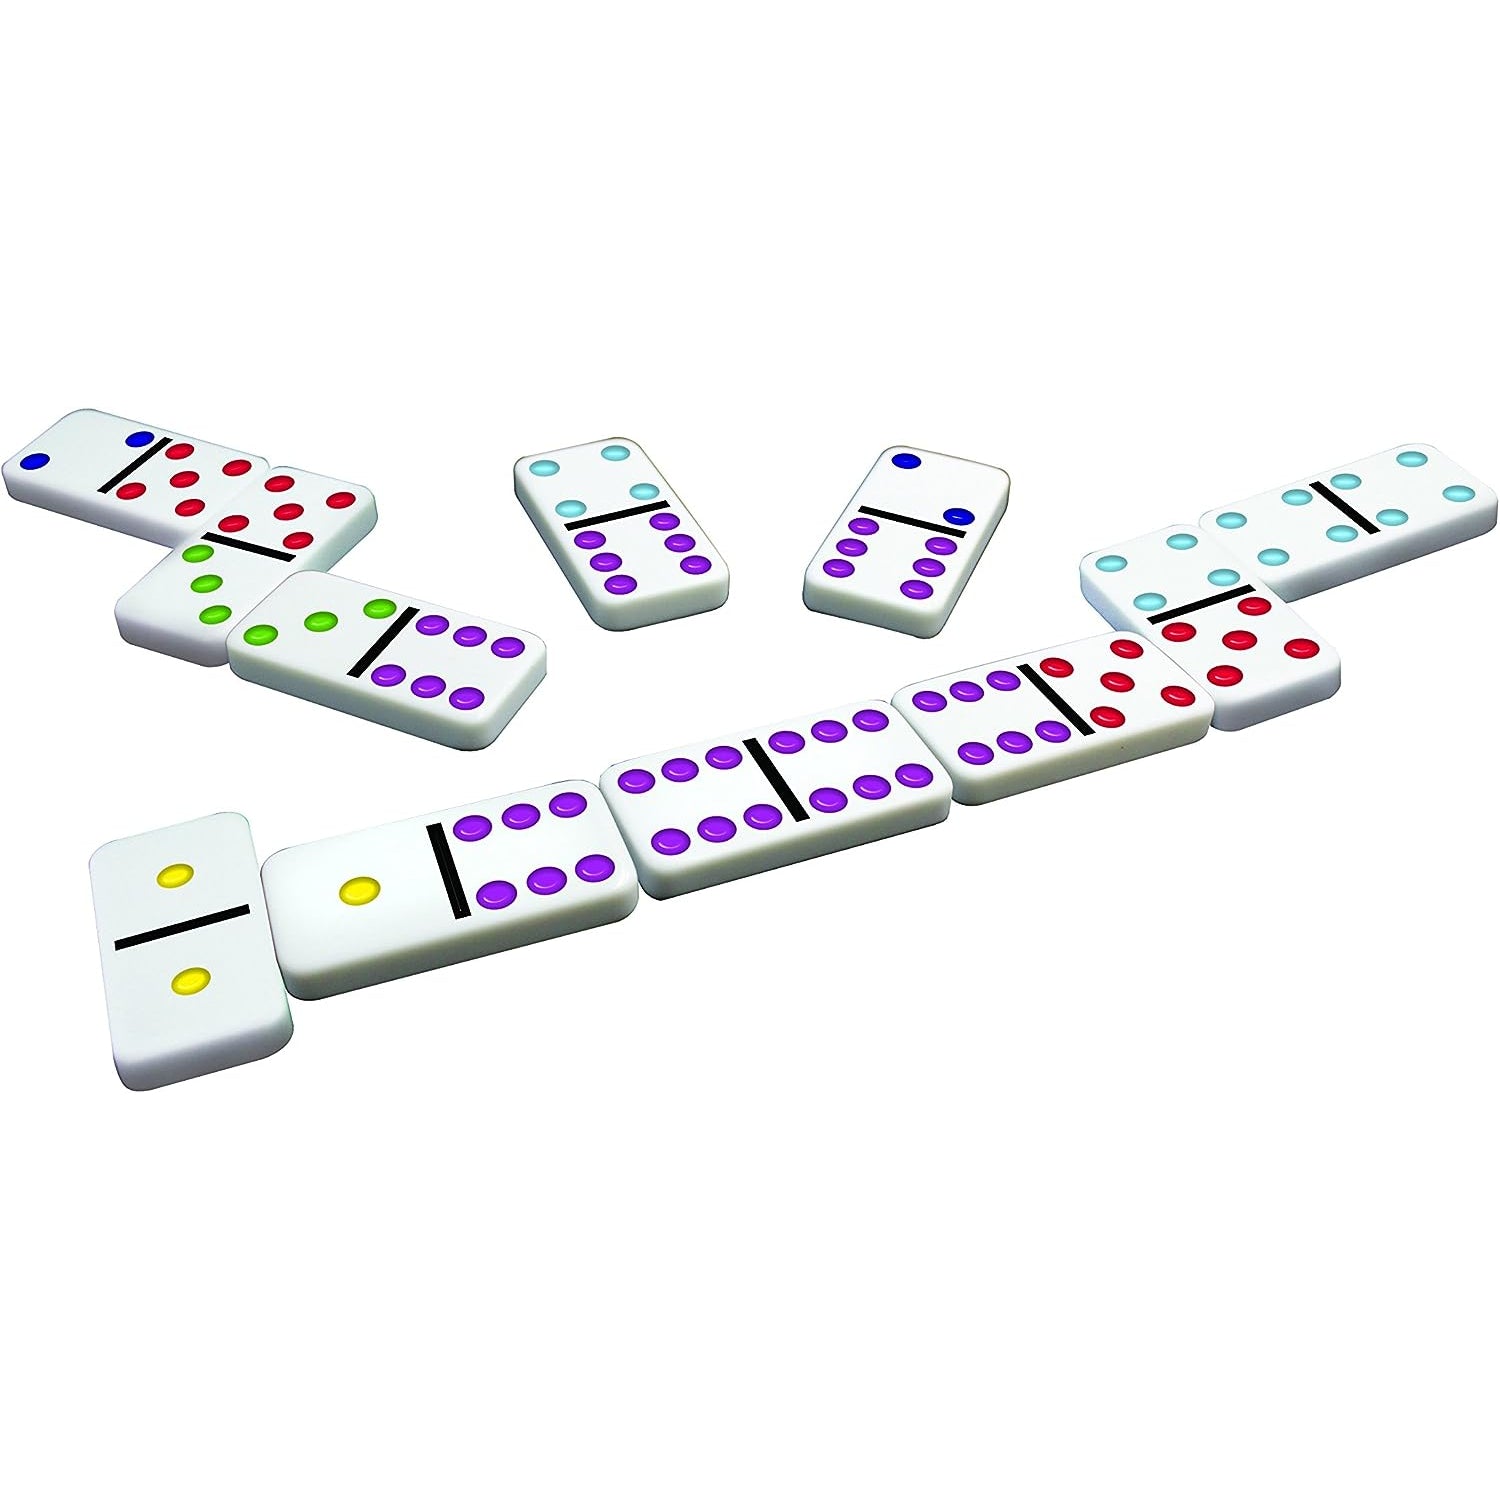 TCG Toys Classic Games - Double 6 Dominoes Tin - Be The First to Win!